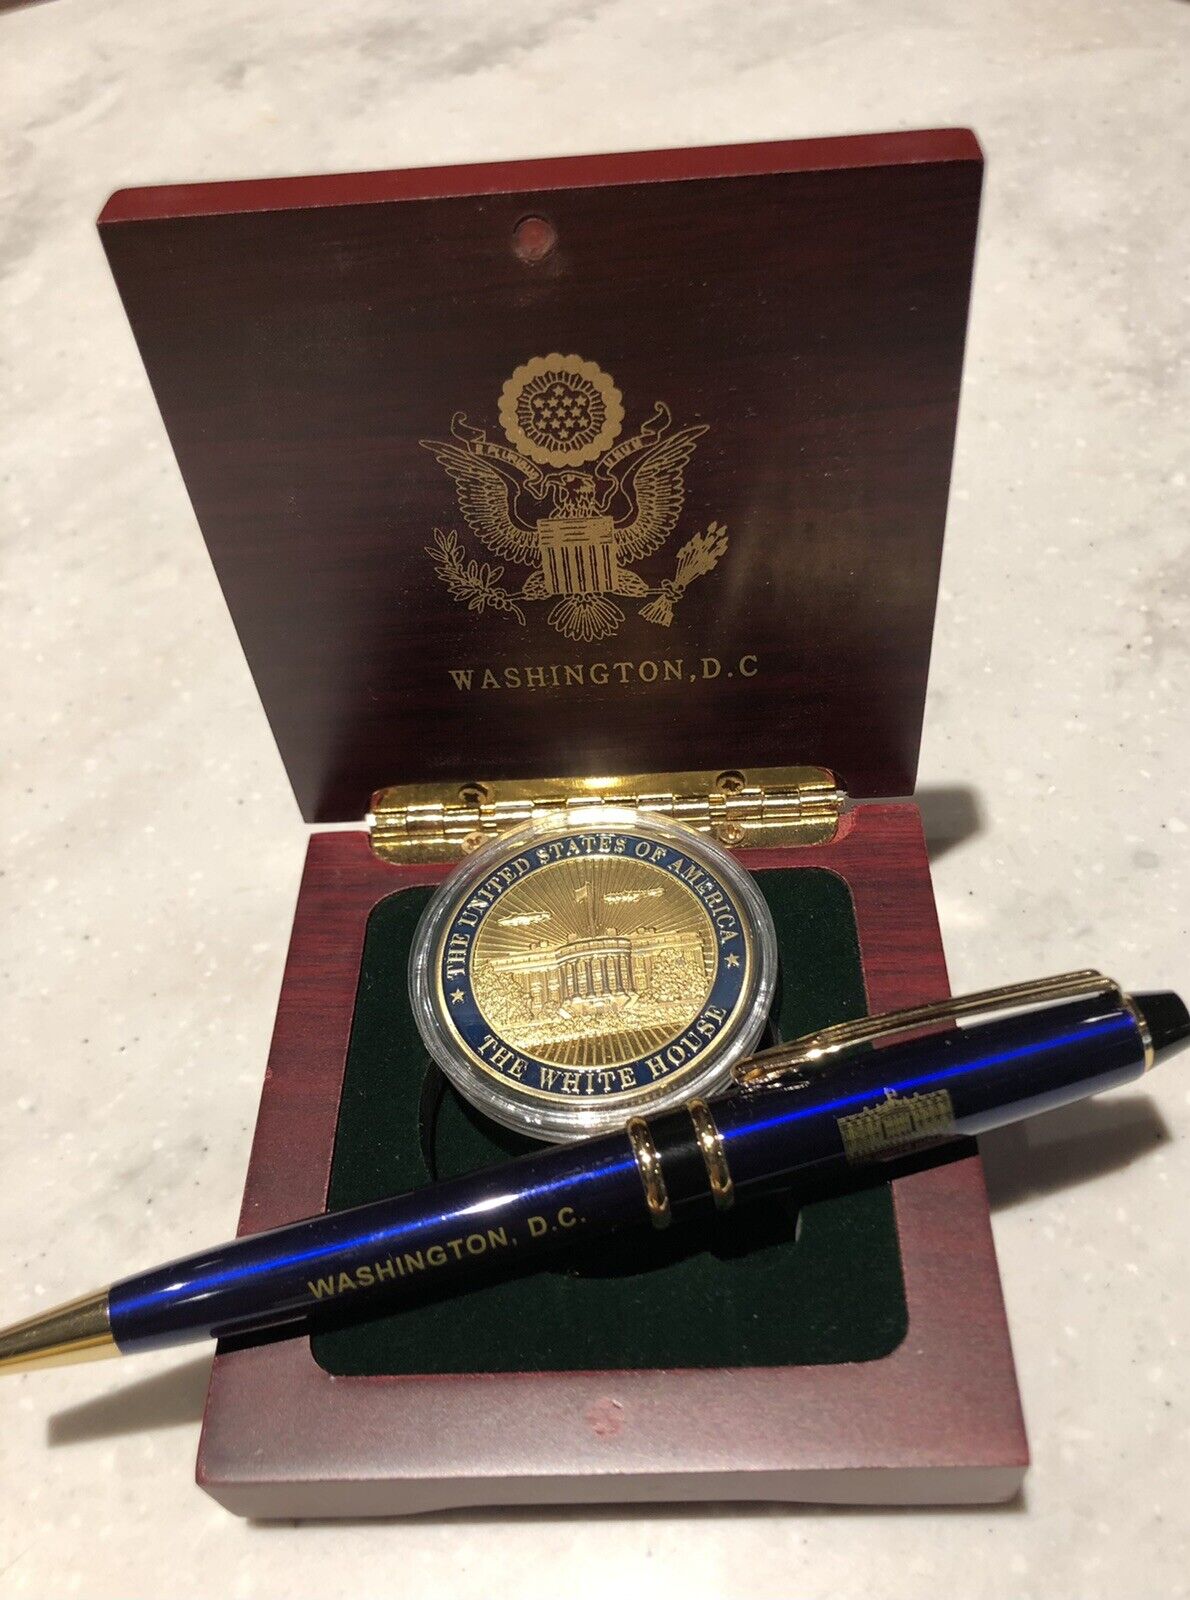 WHITE HOUSE BLUE PEN + CHALLENGE COIN GOLD in WOOD BOX GIFT DEMOCRAT REPUBLICAN.